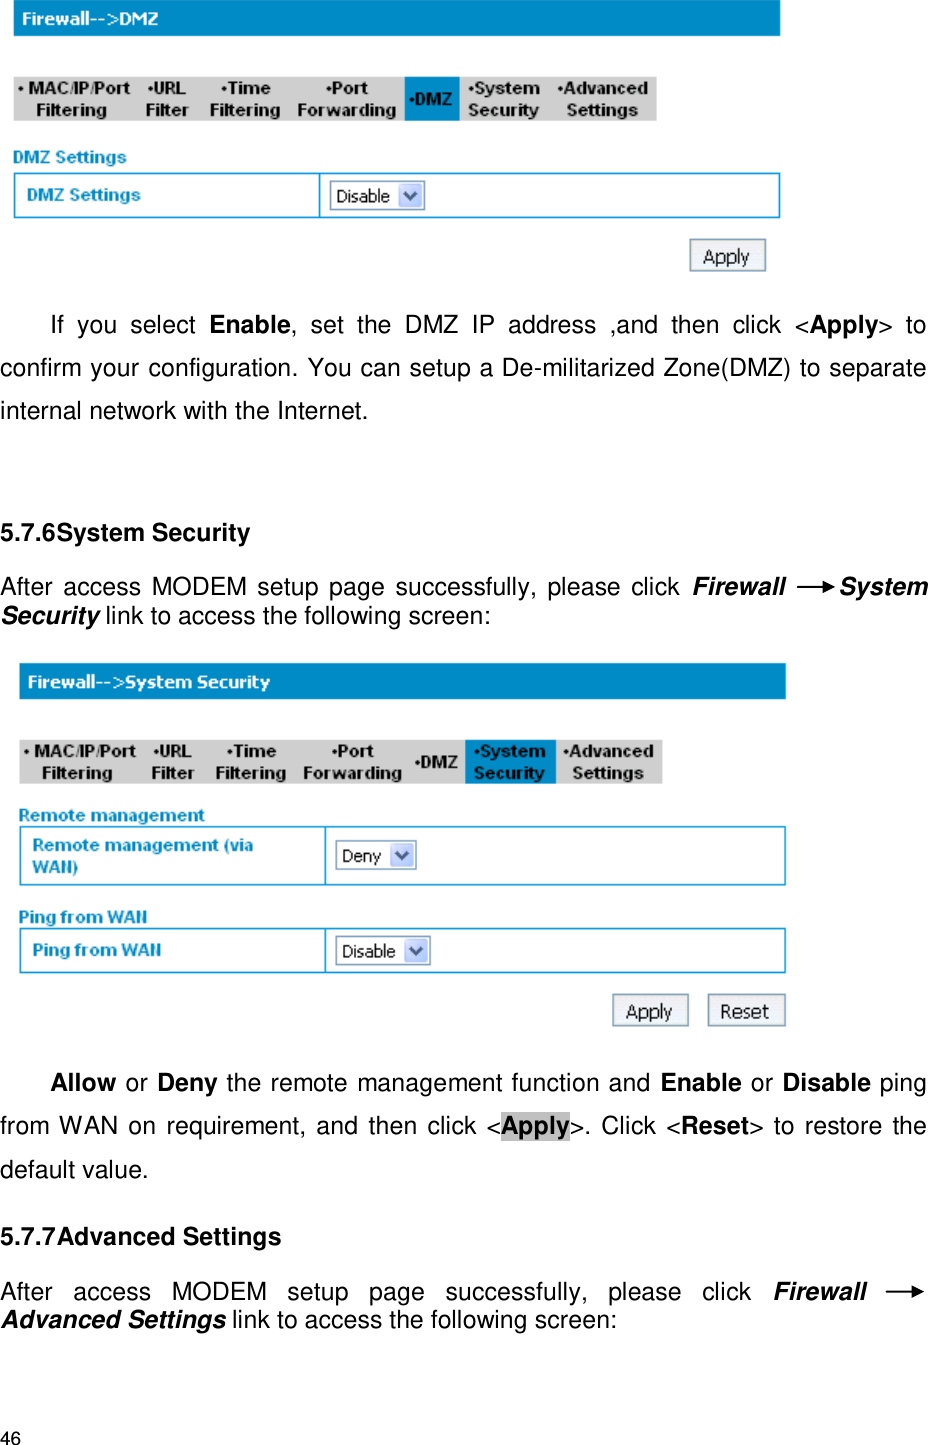 46  If  you  select  Enable,  set  the  DMZ  IP  address  ,and  then  click  &lt;Apply&gt;  to confirm your configuration. You can setup a De-militarized Zone(DMZ) to separate internal network with the Internet.  5.7.6 System Security After access MODEM setup  page  successfully,  please click Firewall  System Security link to access the following screen:    Allow or Deny the remote management function and Enable or Disable ping from WAN on requirement, and then click &lt;Apply&gt;. Click &lt;Reset&gt; to restore the default value. 5.7.7 Advanced Settings After  access  MODEM  setup  page  successfully,  please  click  Firewall Advanced Settings link to access the following screen: 